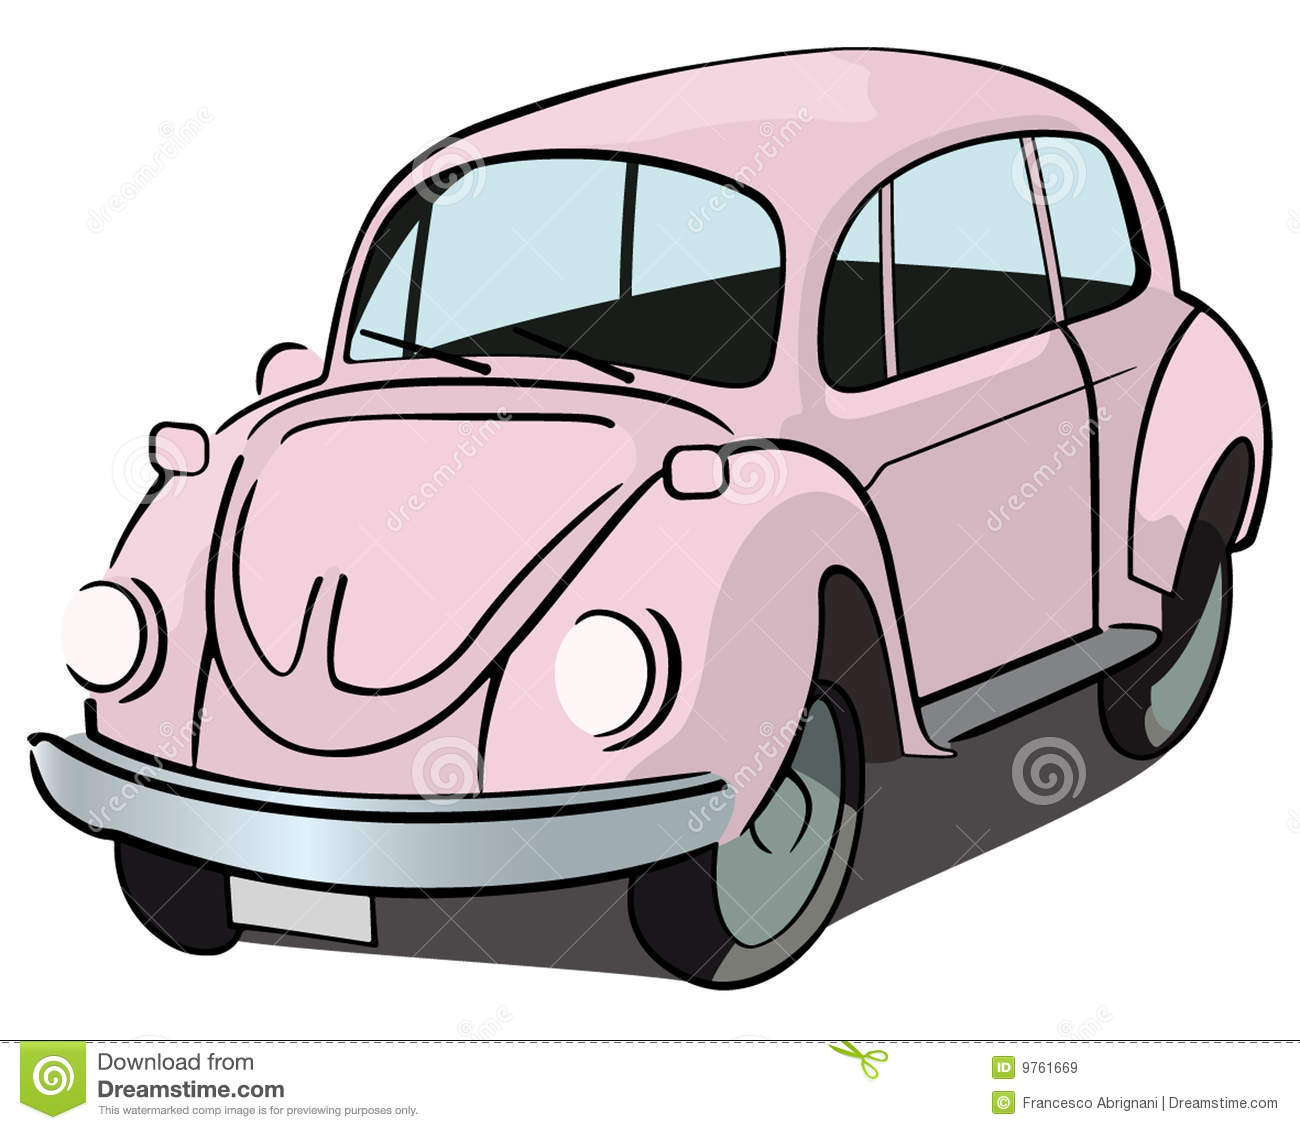 Beetle Car Royalty Free Stock Images   Image  9761669